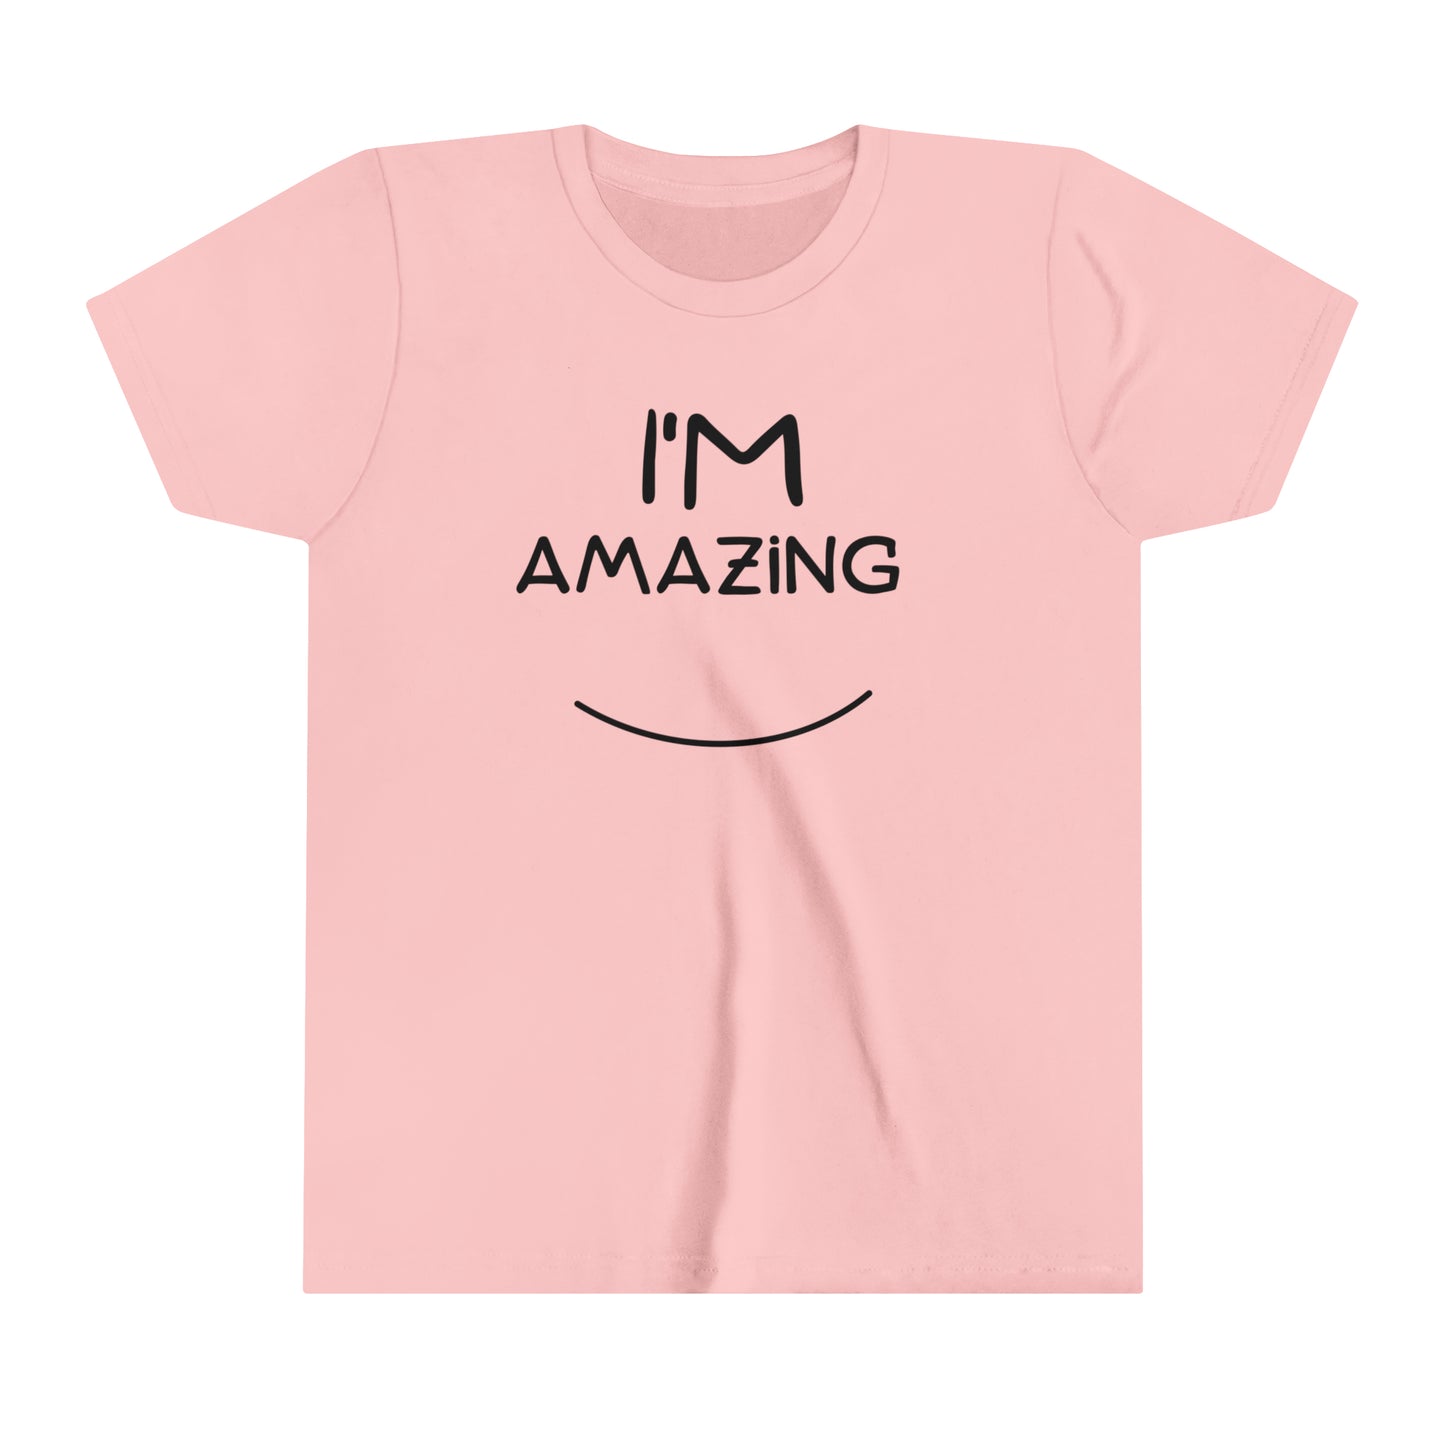 I'm Amazing With Smile, girls shirt, gift for girls, gift for daughters, girls tee